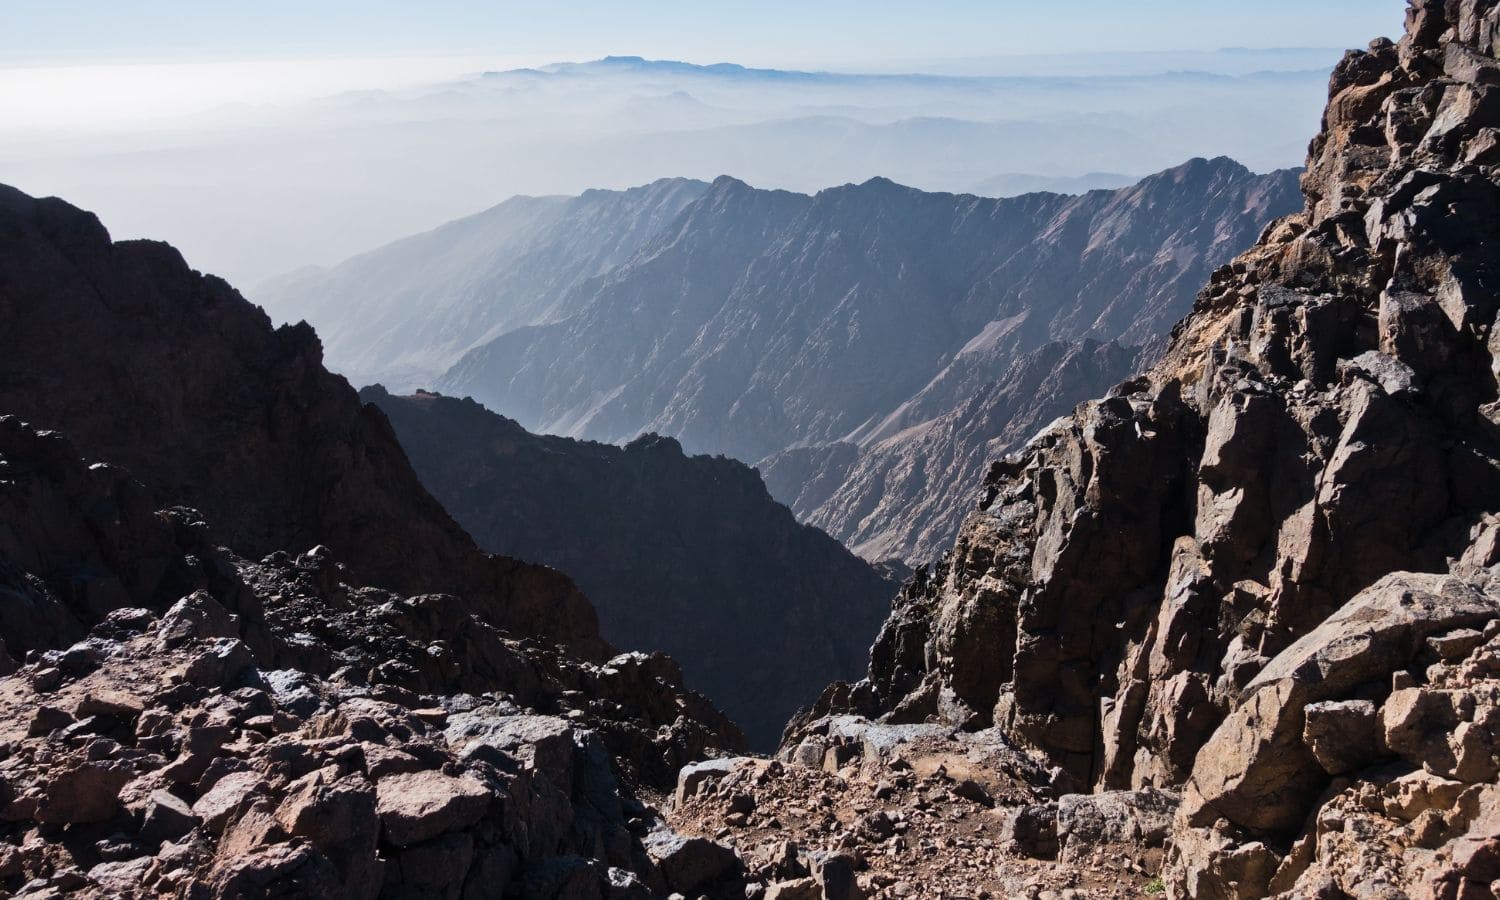 Tallest peaks of High Atlas Mountains including Toubkal